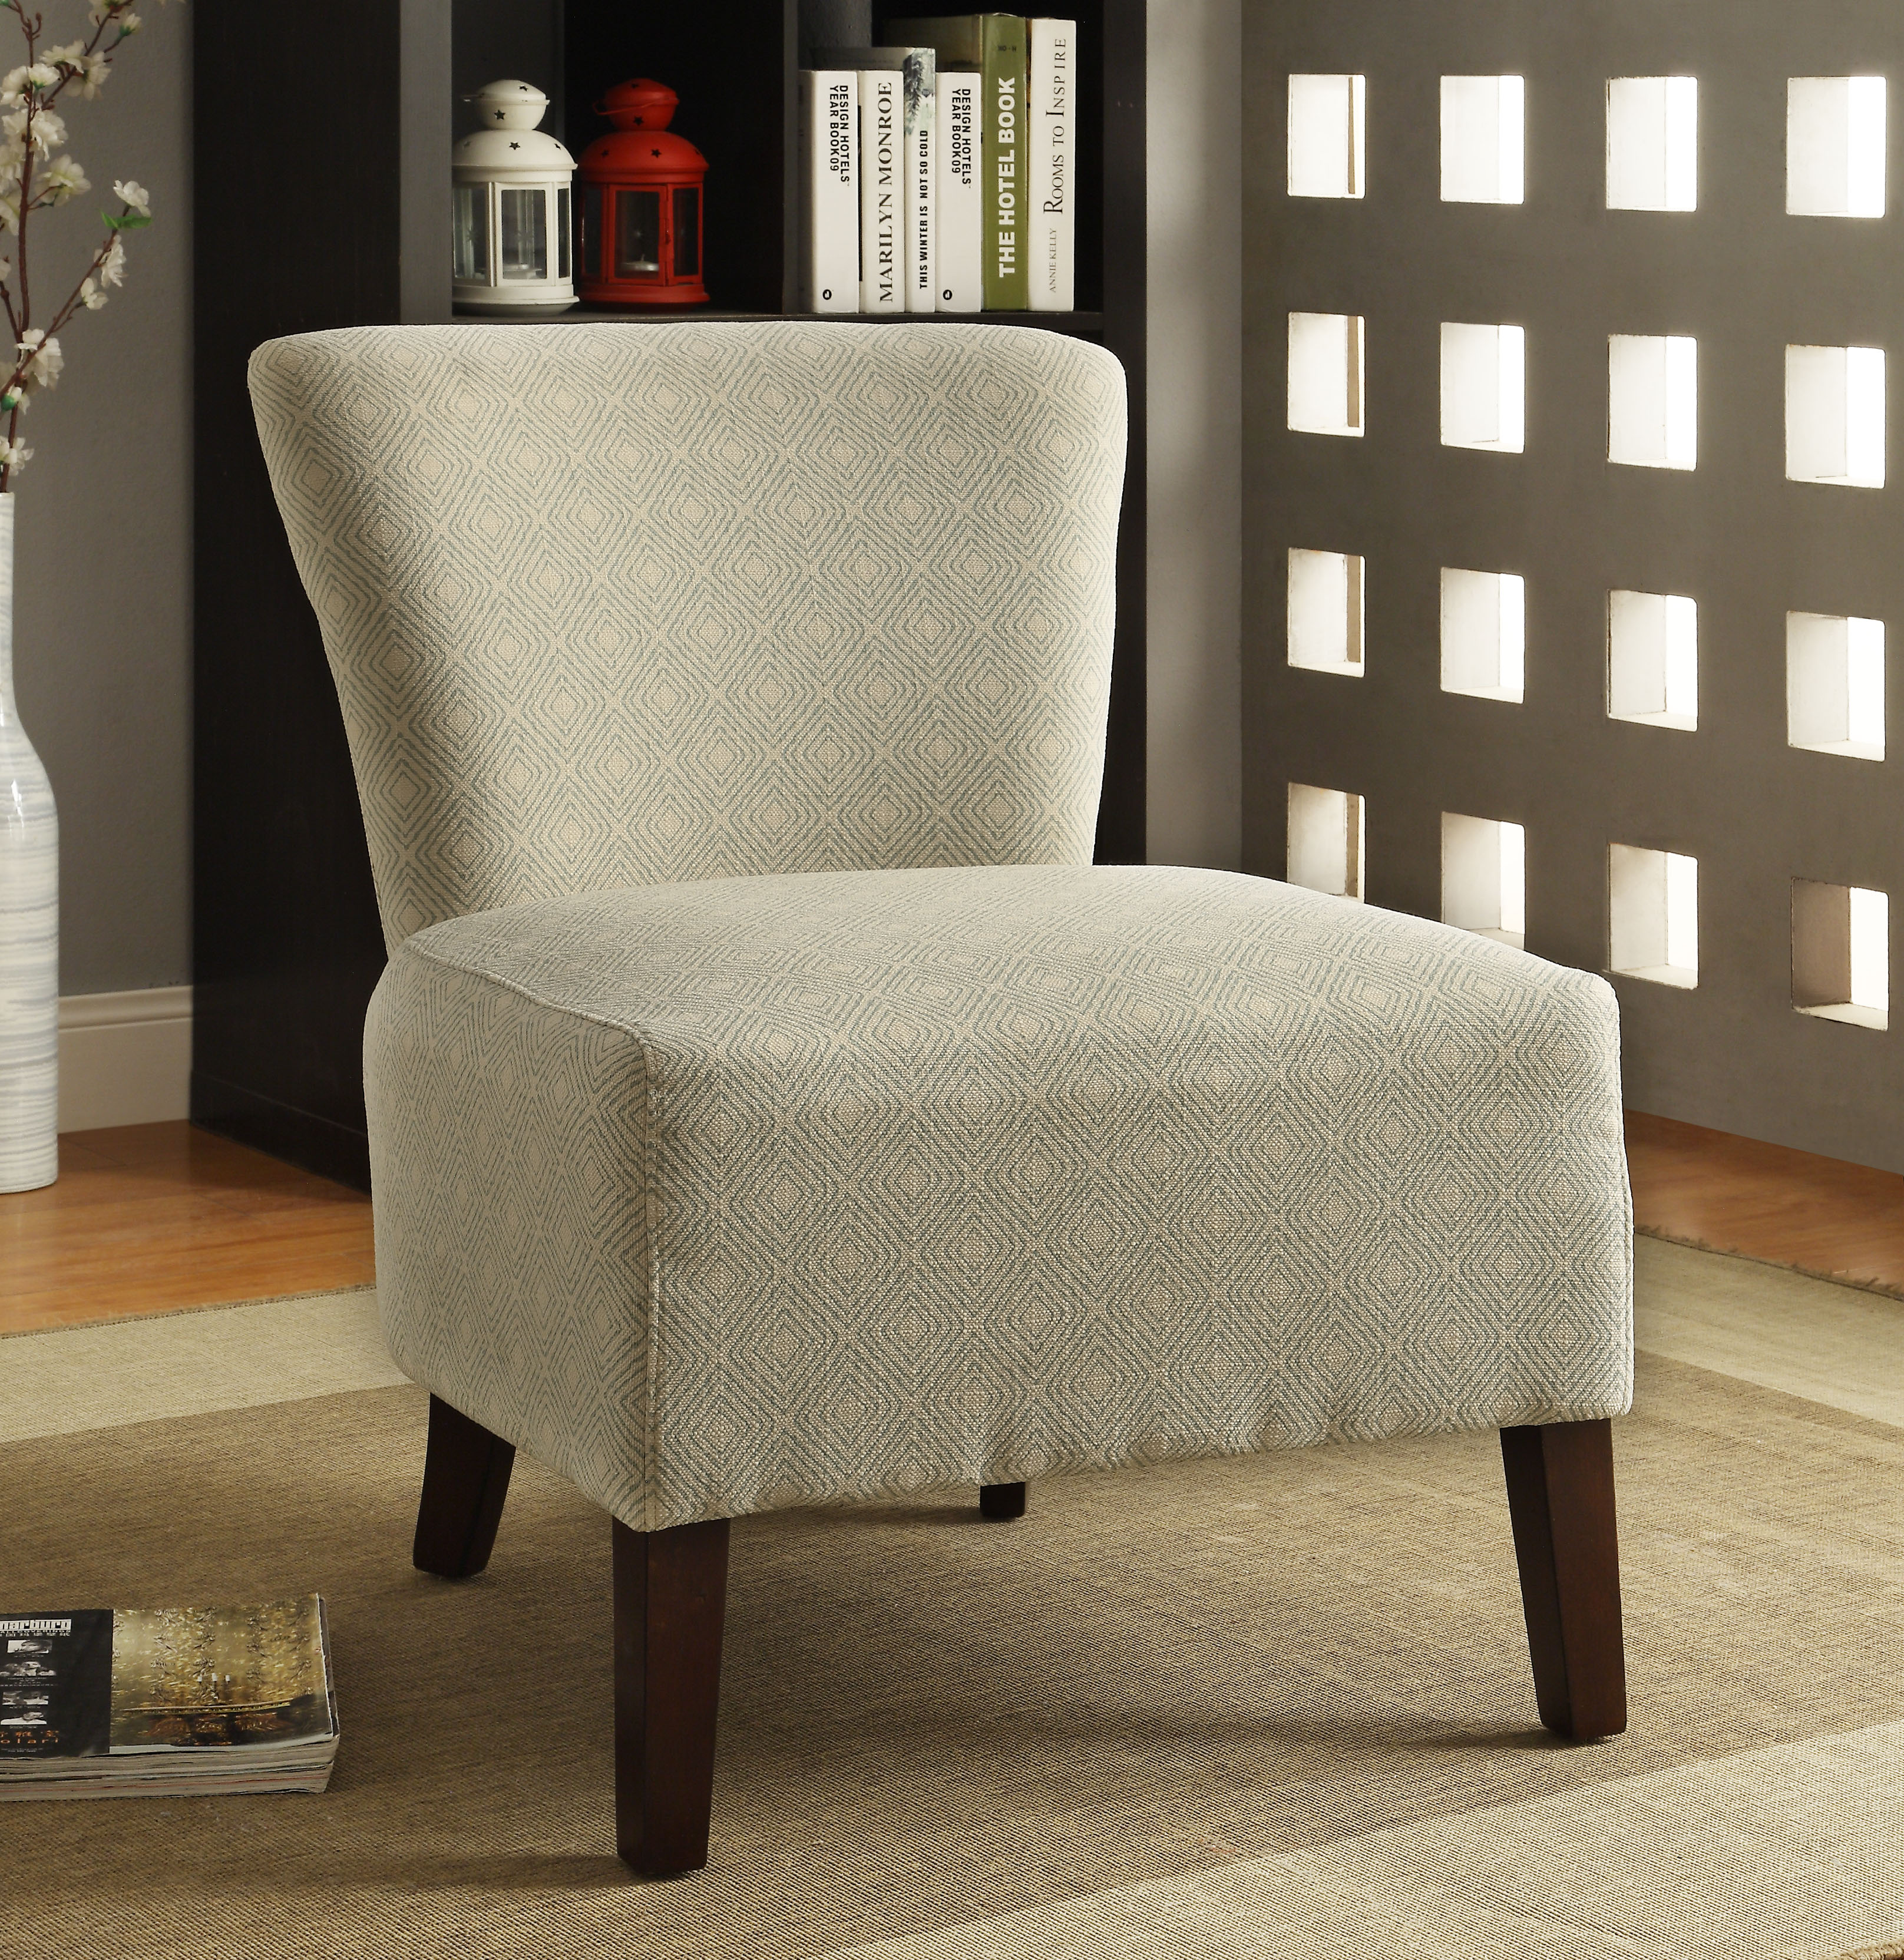 Furniture of America Wyllin Upholstered Accent Chair